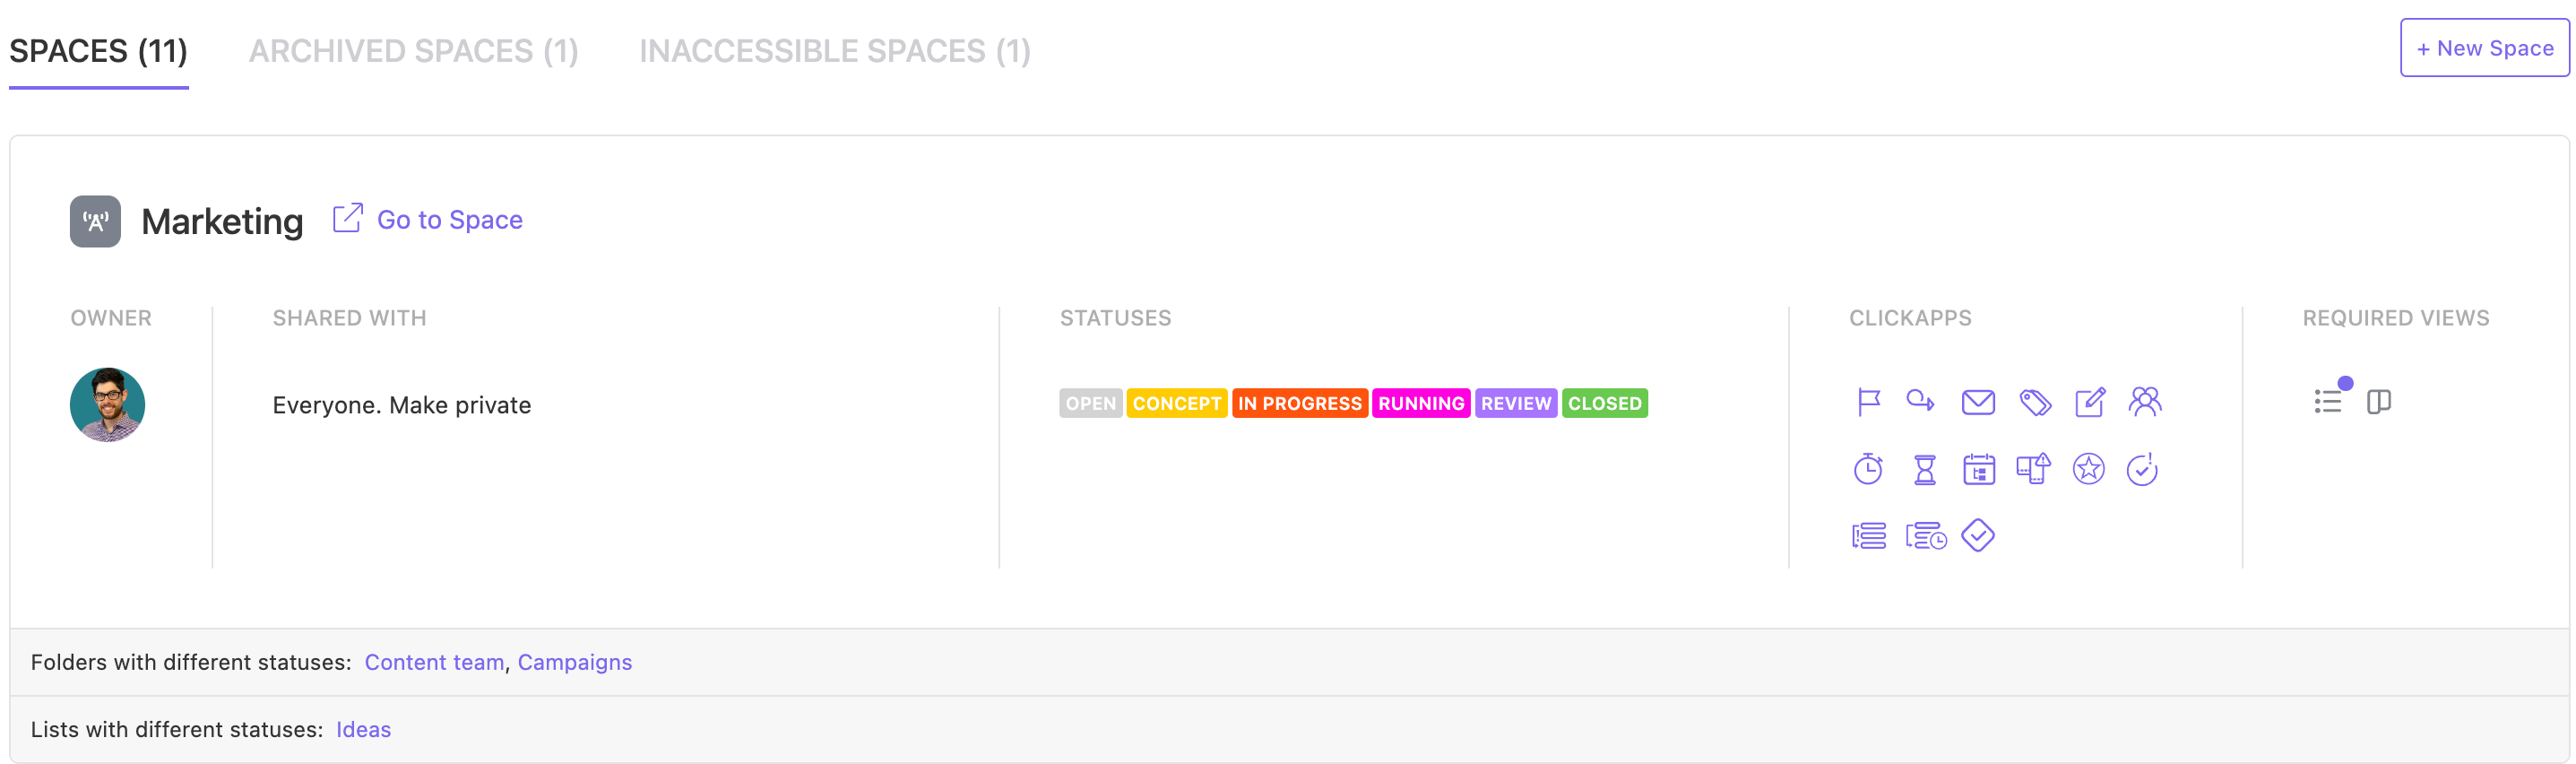 Screenshot of the Spaces page showing options to view and manage all of the Space in a Workspace.